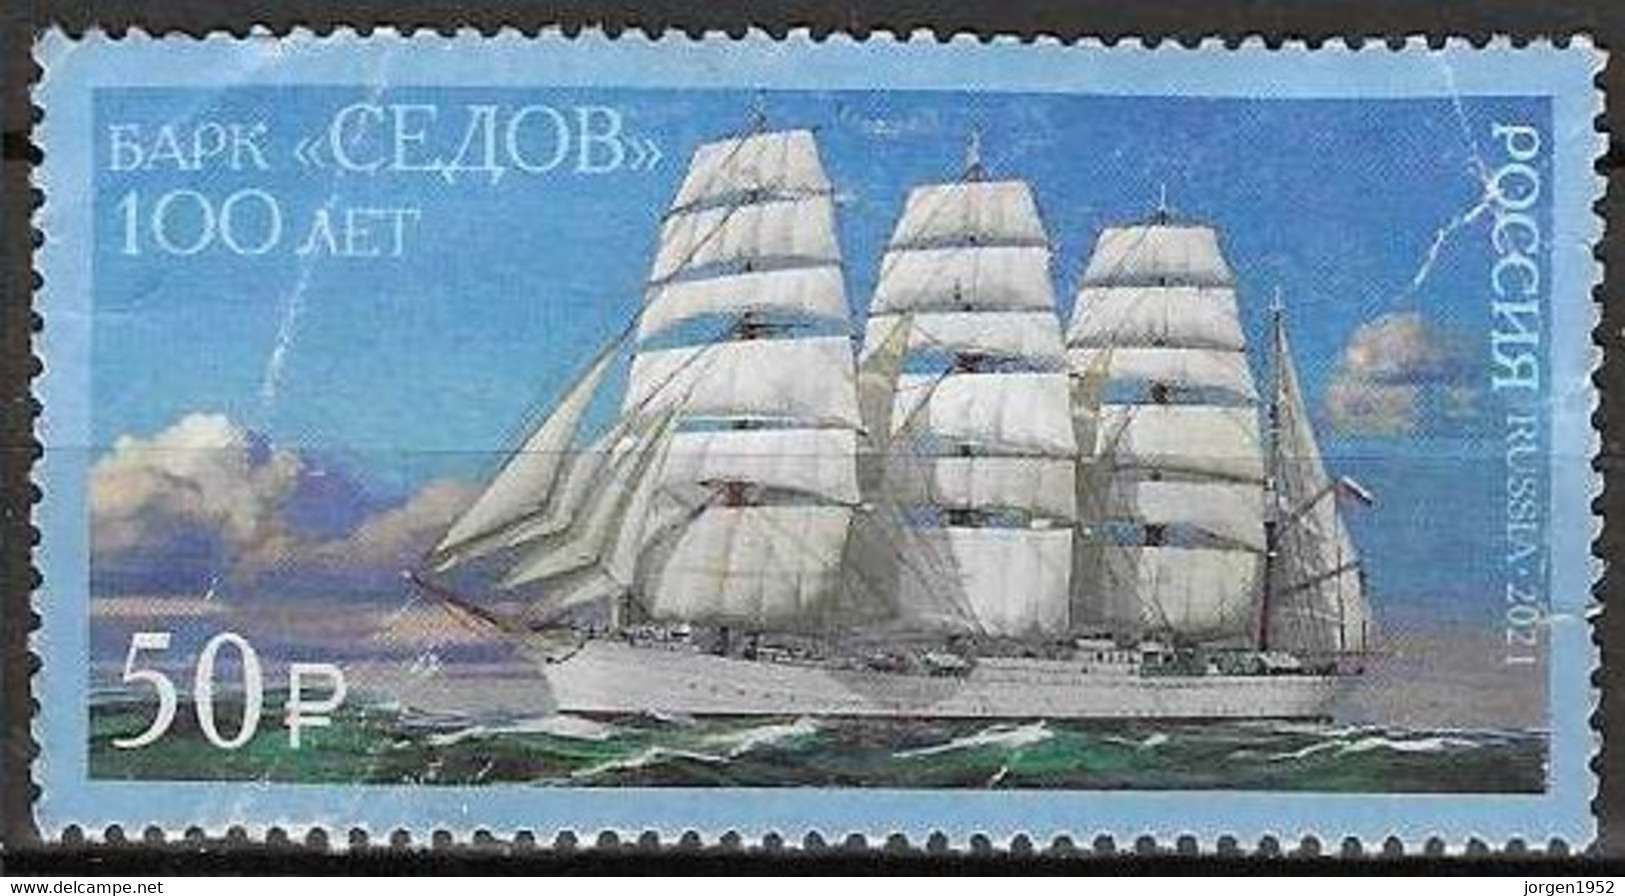 RUSSIA # FROM 2021 STAMPWORLD 3040 - Oblitérés